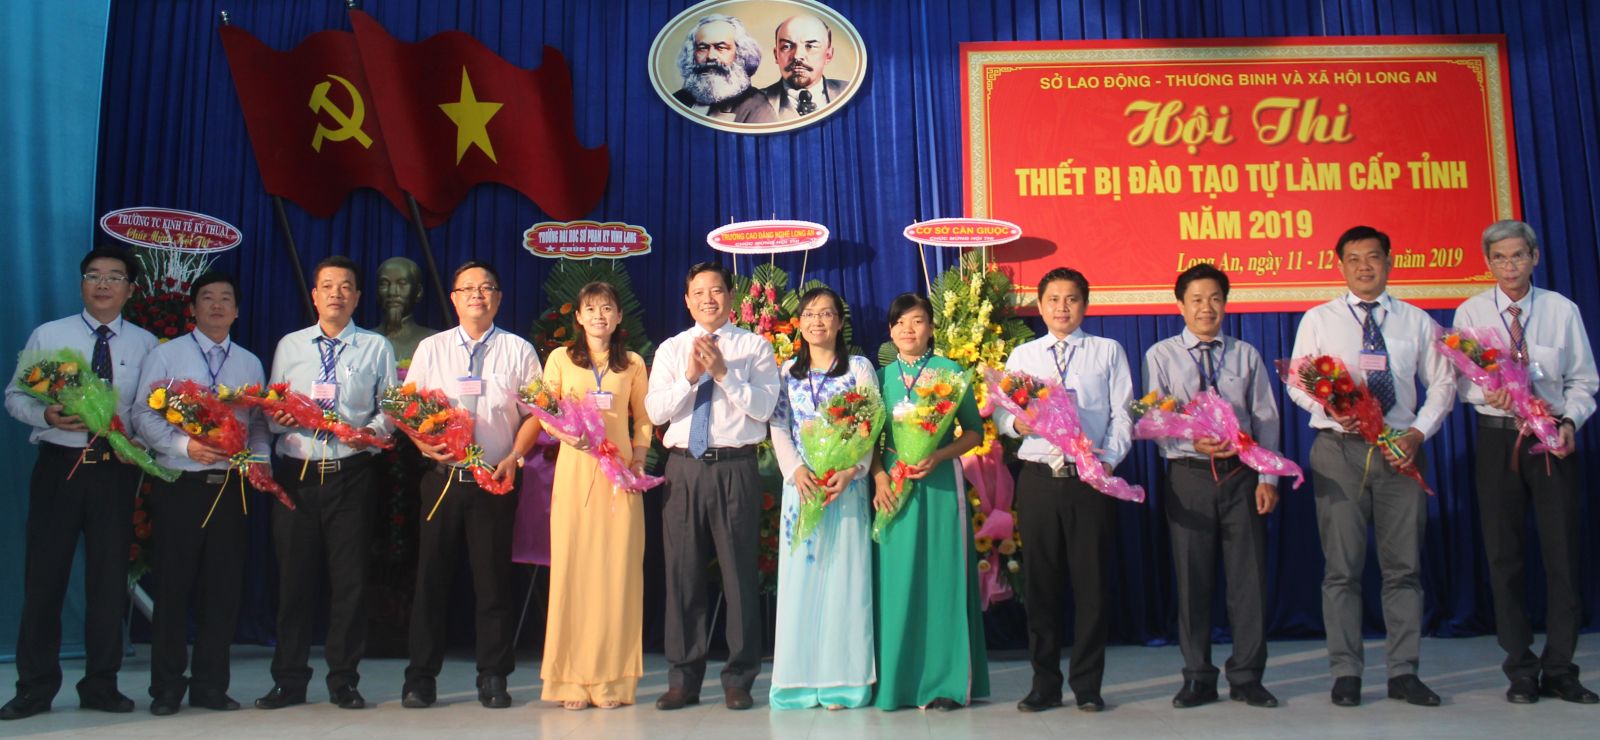 Vice Chairman of Long An Provincial People's Committee - Pham Tan Hoa presented flowers to the contest jury